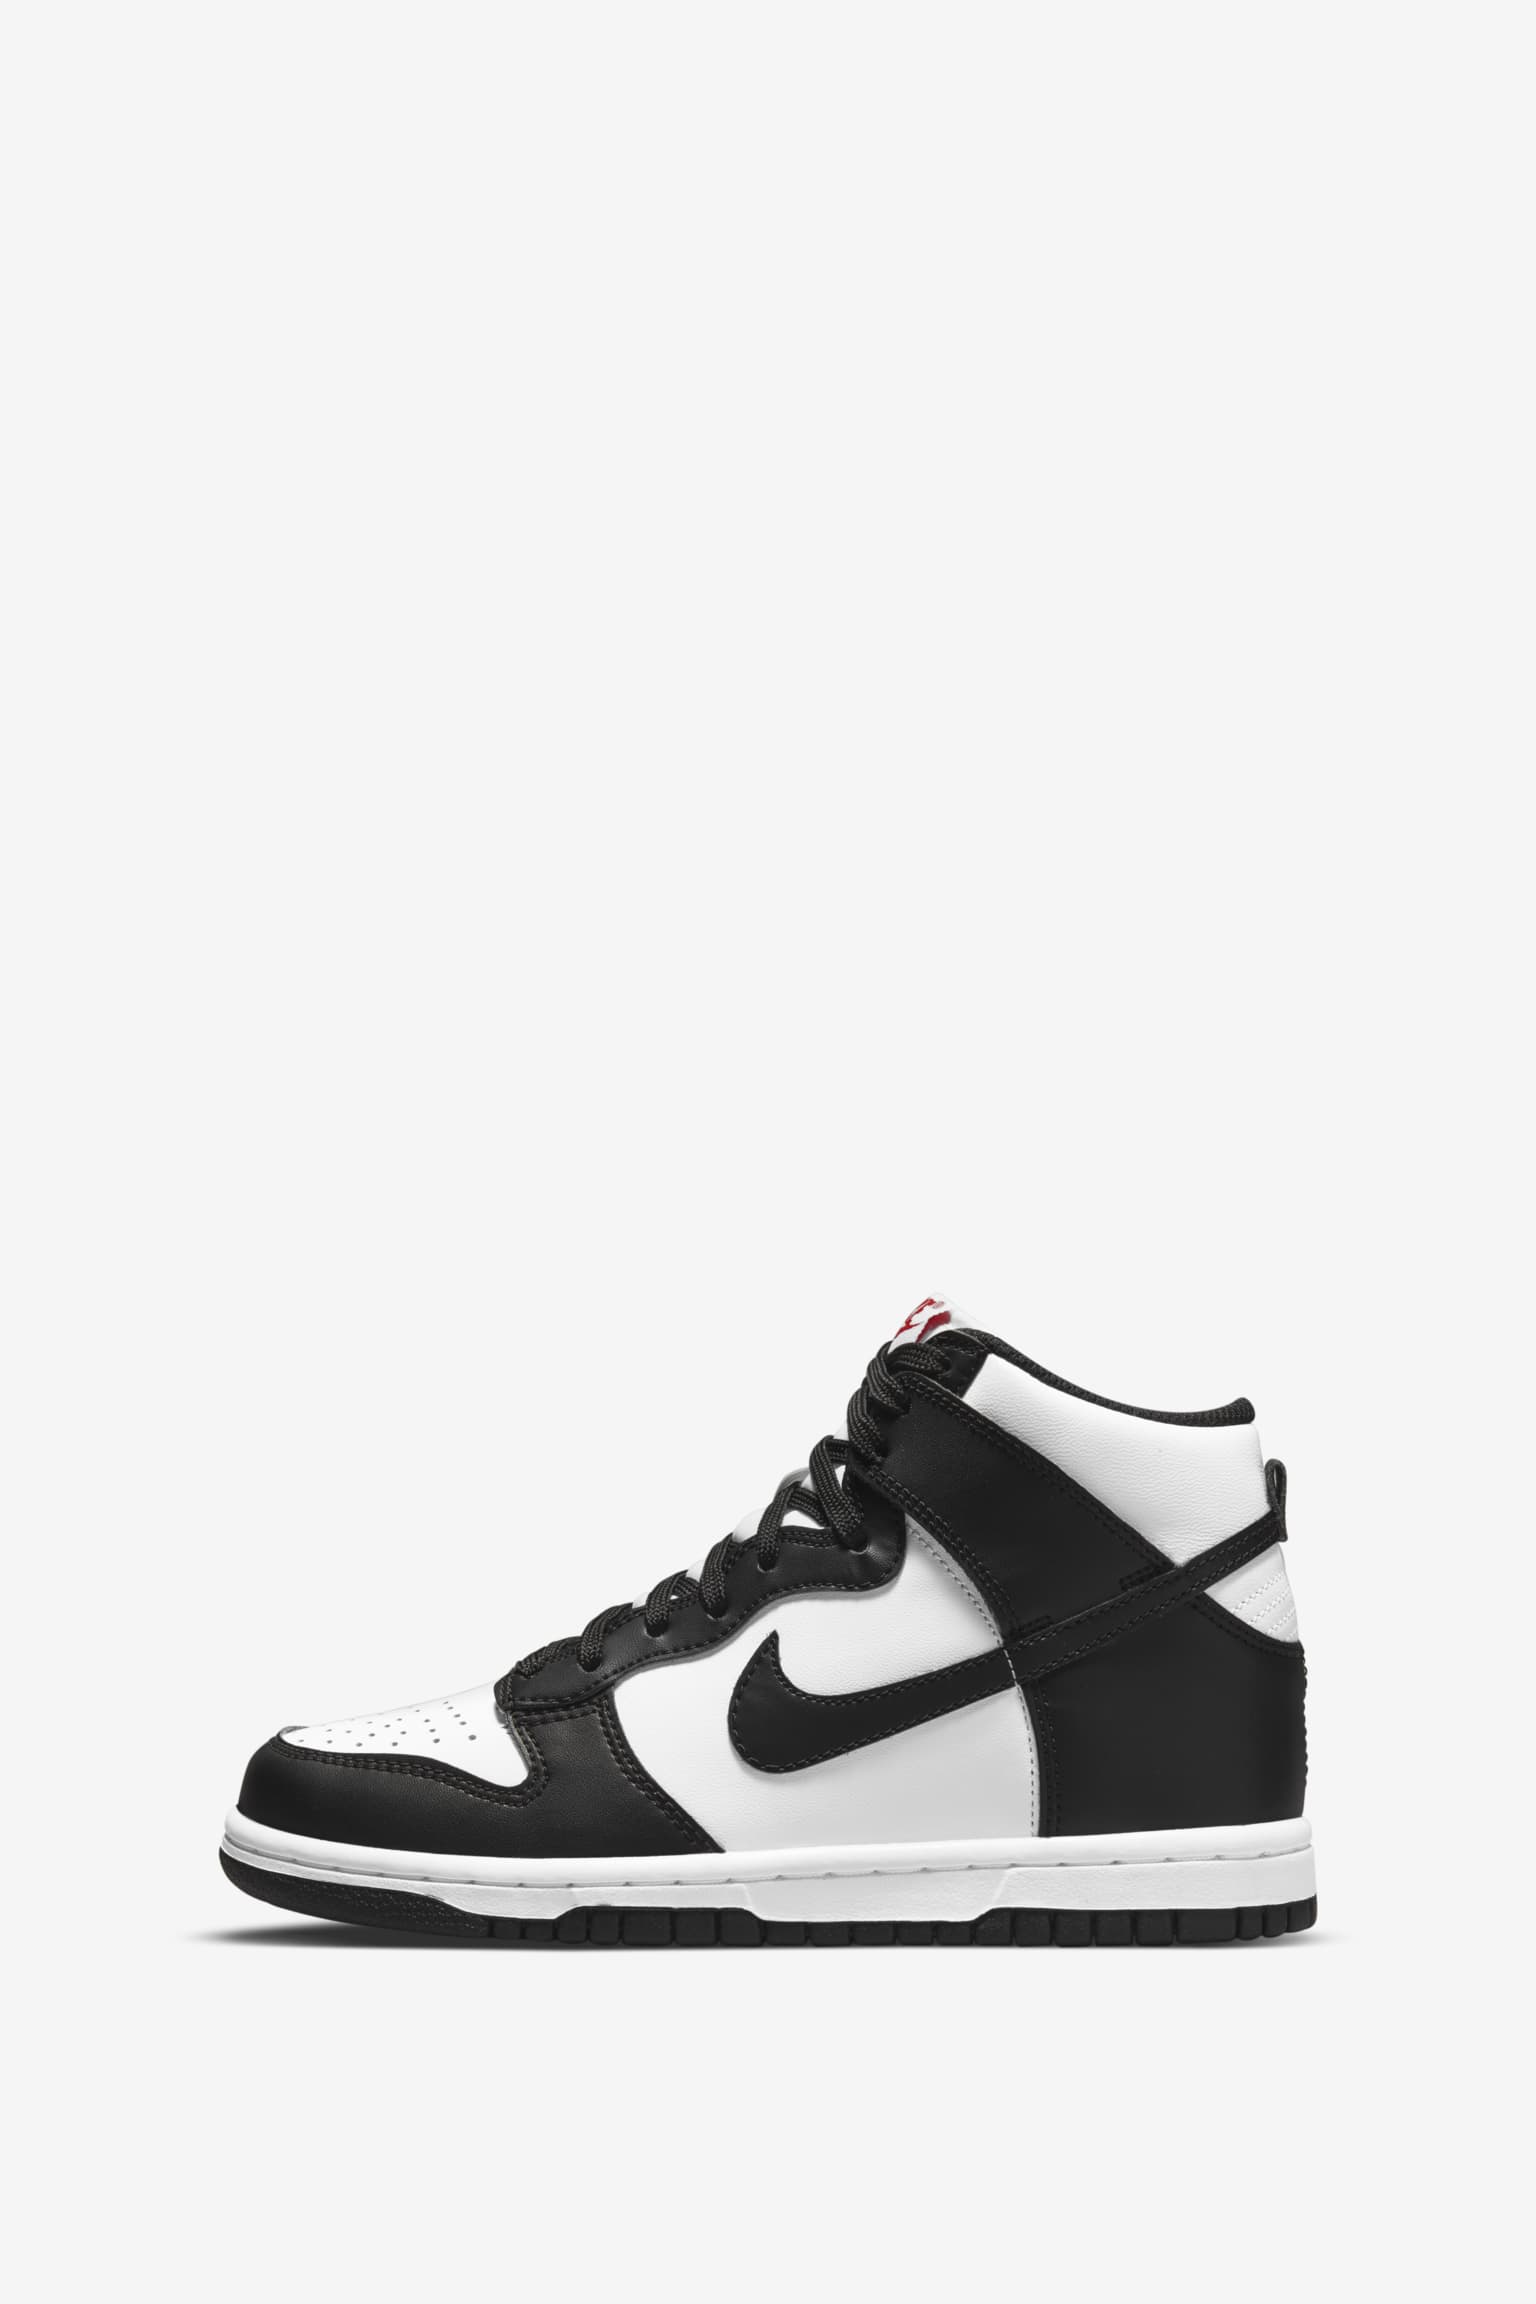 Dunk High 'Black and White' Release Date. Nike SNKRS SG